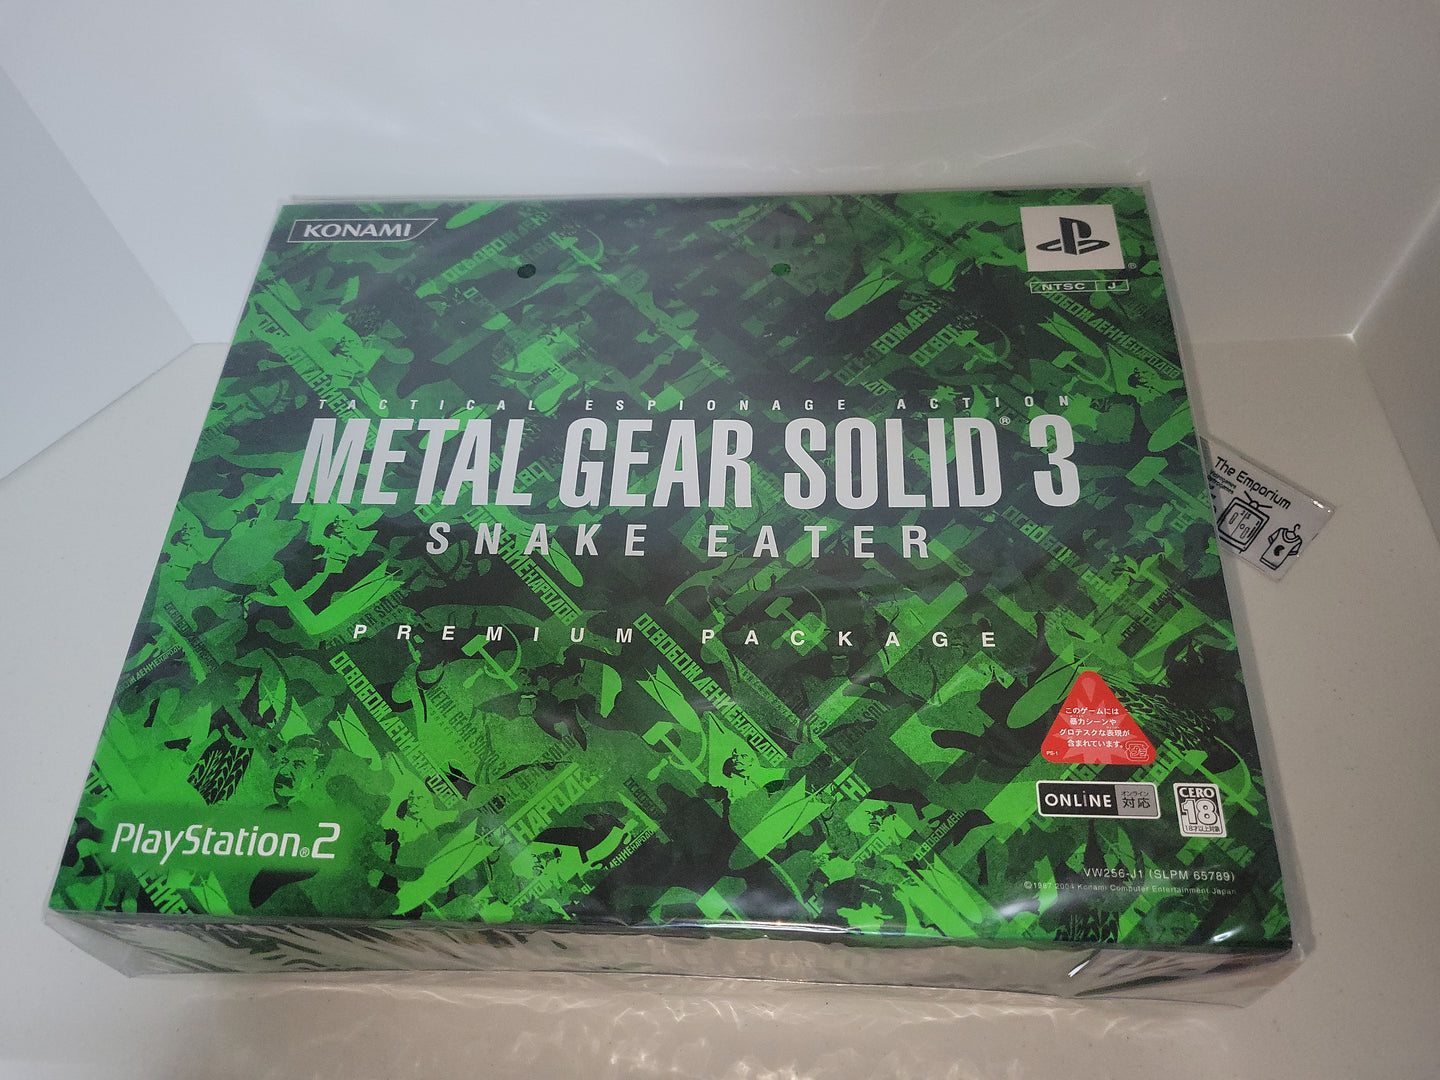 Metal Gear Solid 3 [Premium Package] - Sony PS2 Playstation 2